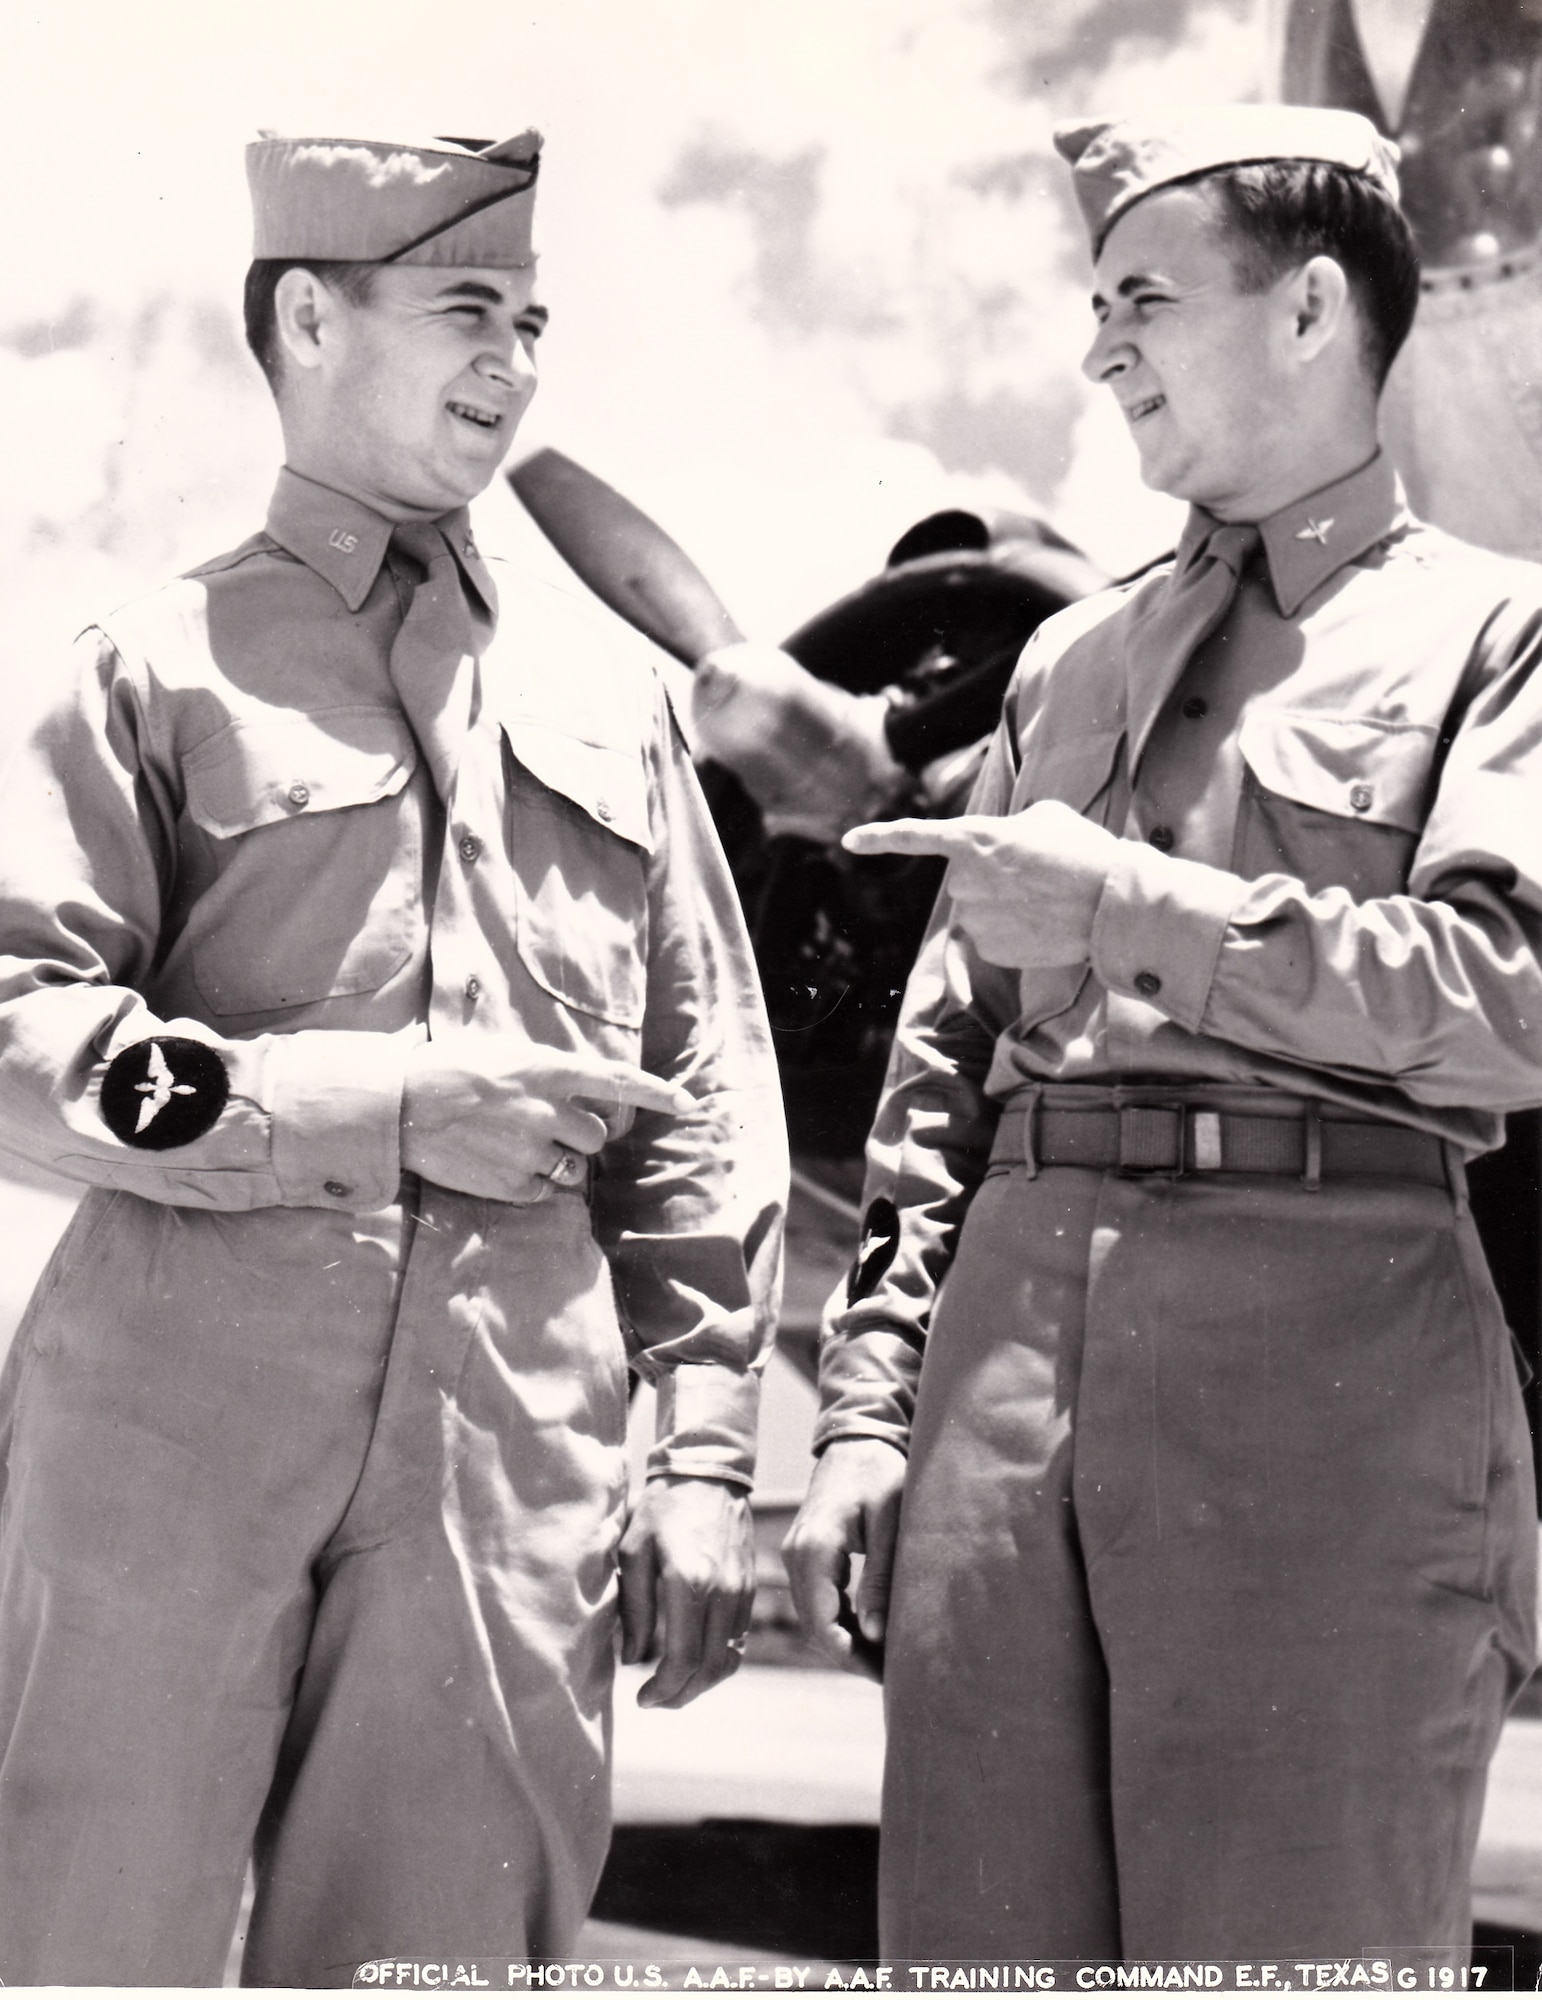 A vintage photo of retired Air Force Reserve Majs. Raymond “Glenn” Clanin and Russell “Lynn” Clanin during training in the Aviation Cadet program, prior to receiving their pilot wings in August 1944 at Ellington Field, Texas. Seventy-one years later, the 92-year-old twin brothers are recipients of the French government's highest distinction for their military service as World War II veterans, the Legion of Honor medal. (Courtesy photo/U.S. Army Air Forces, AAF Training Command)